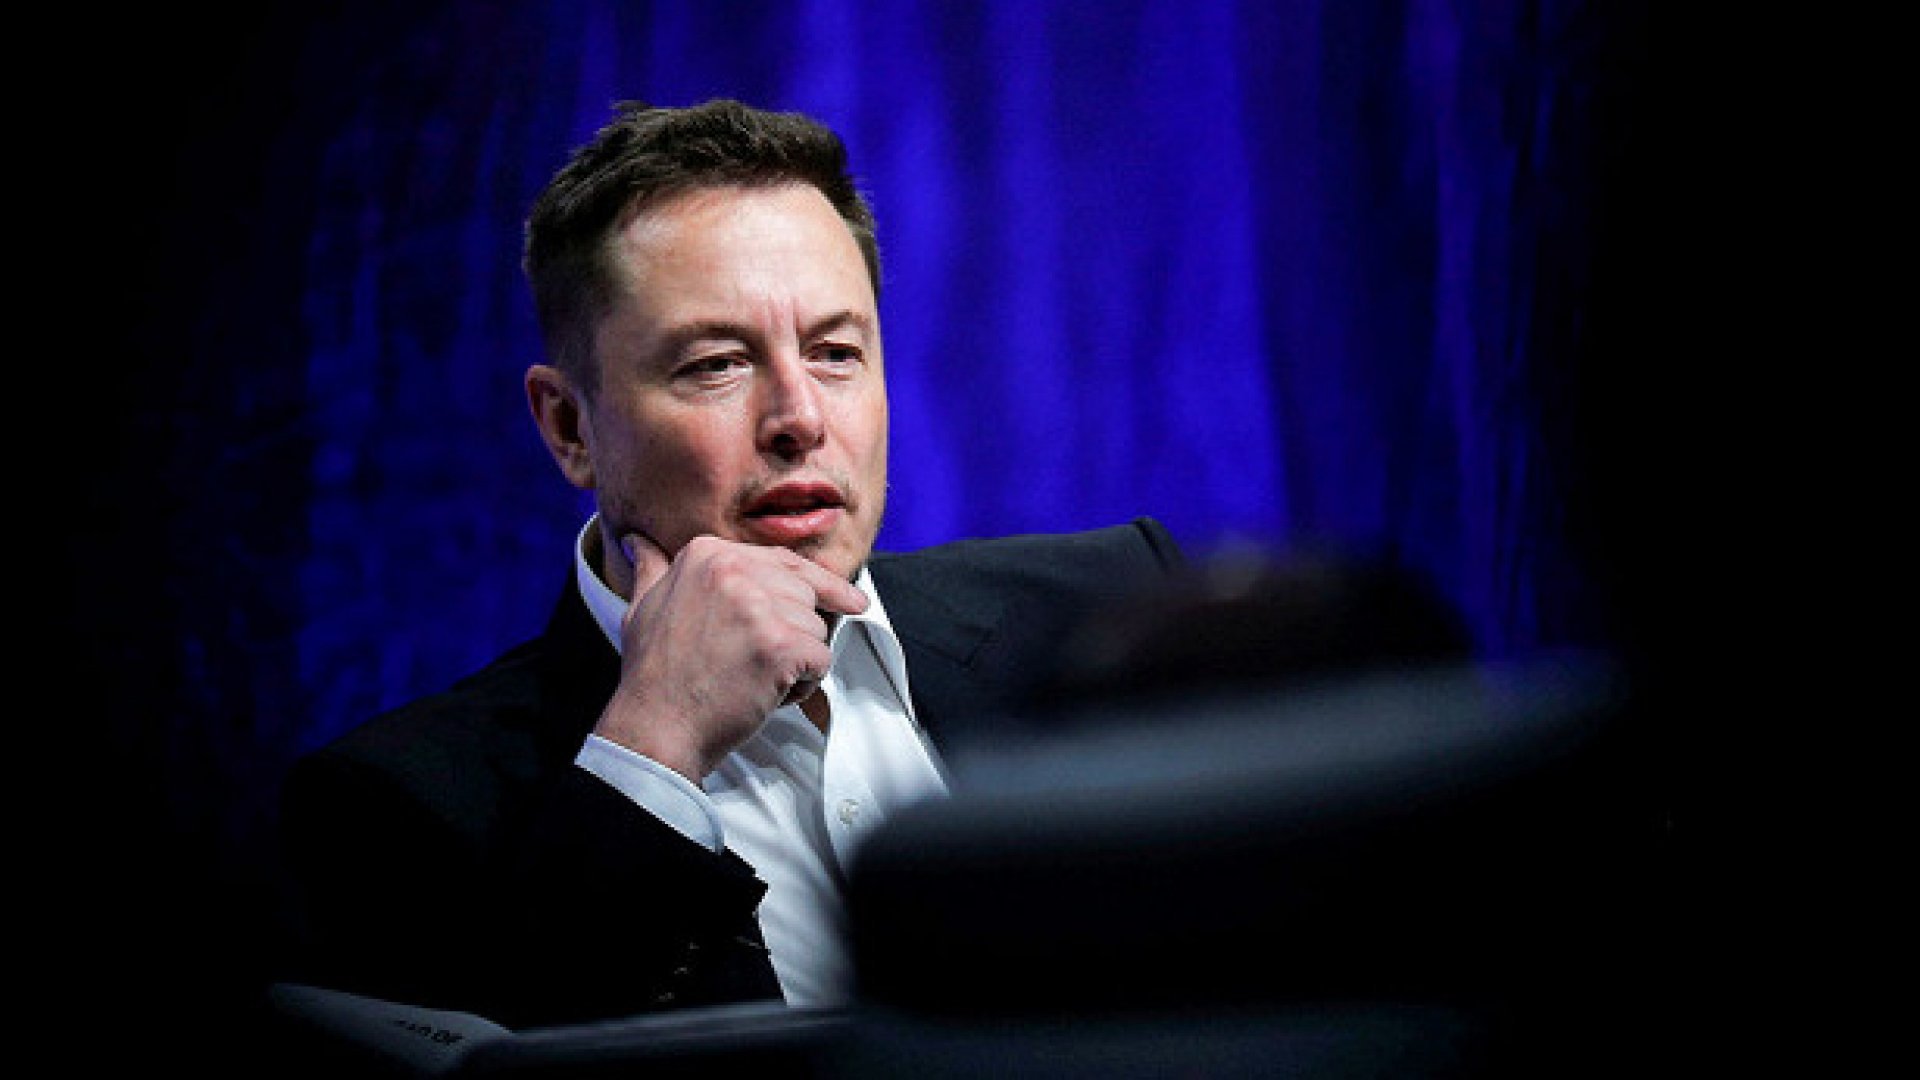 Elon Musk has changed the attitude of the investors and they were happy